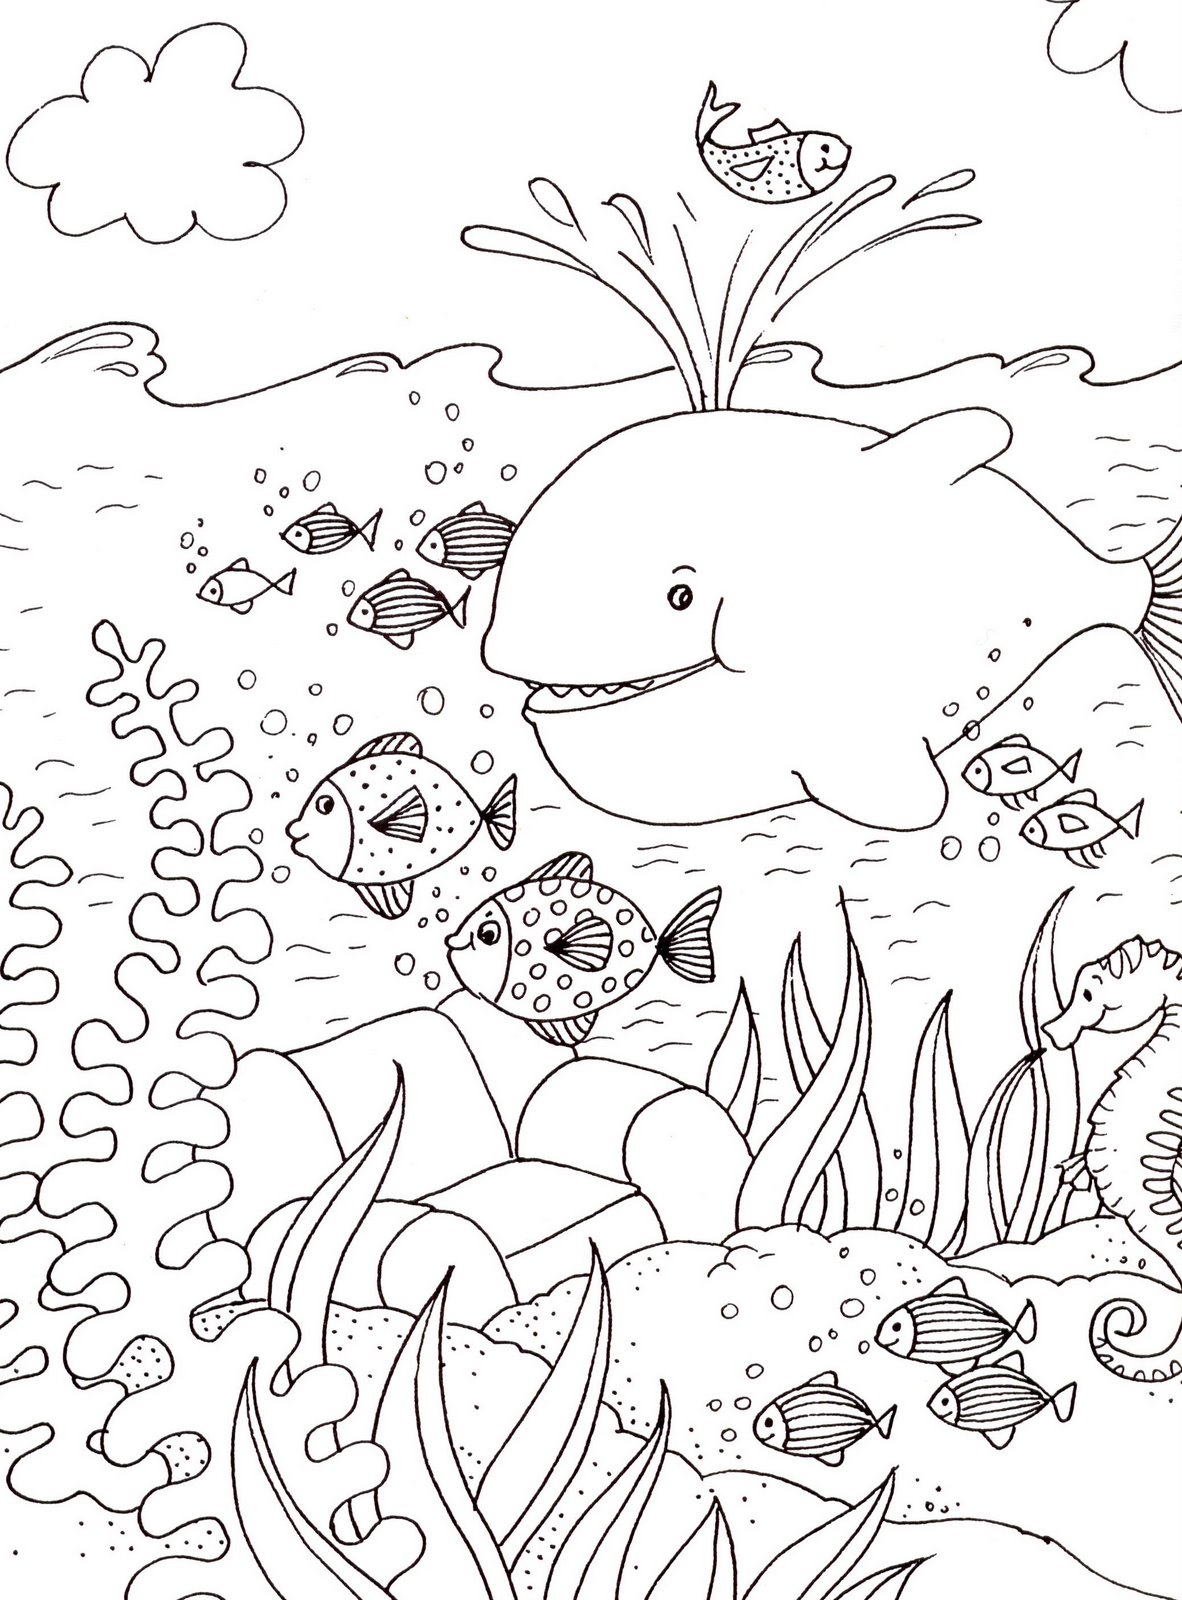 A whale and fish to color